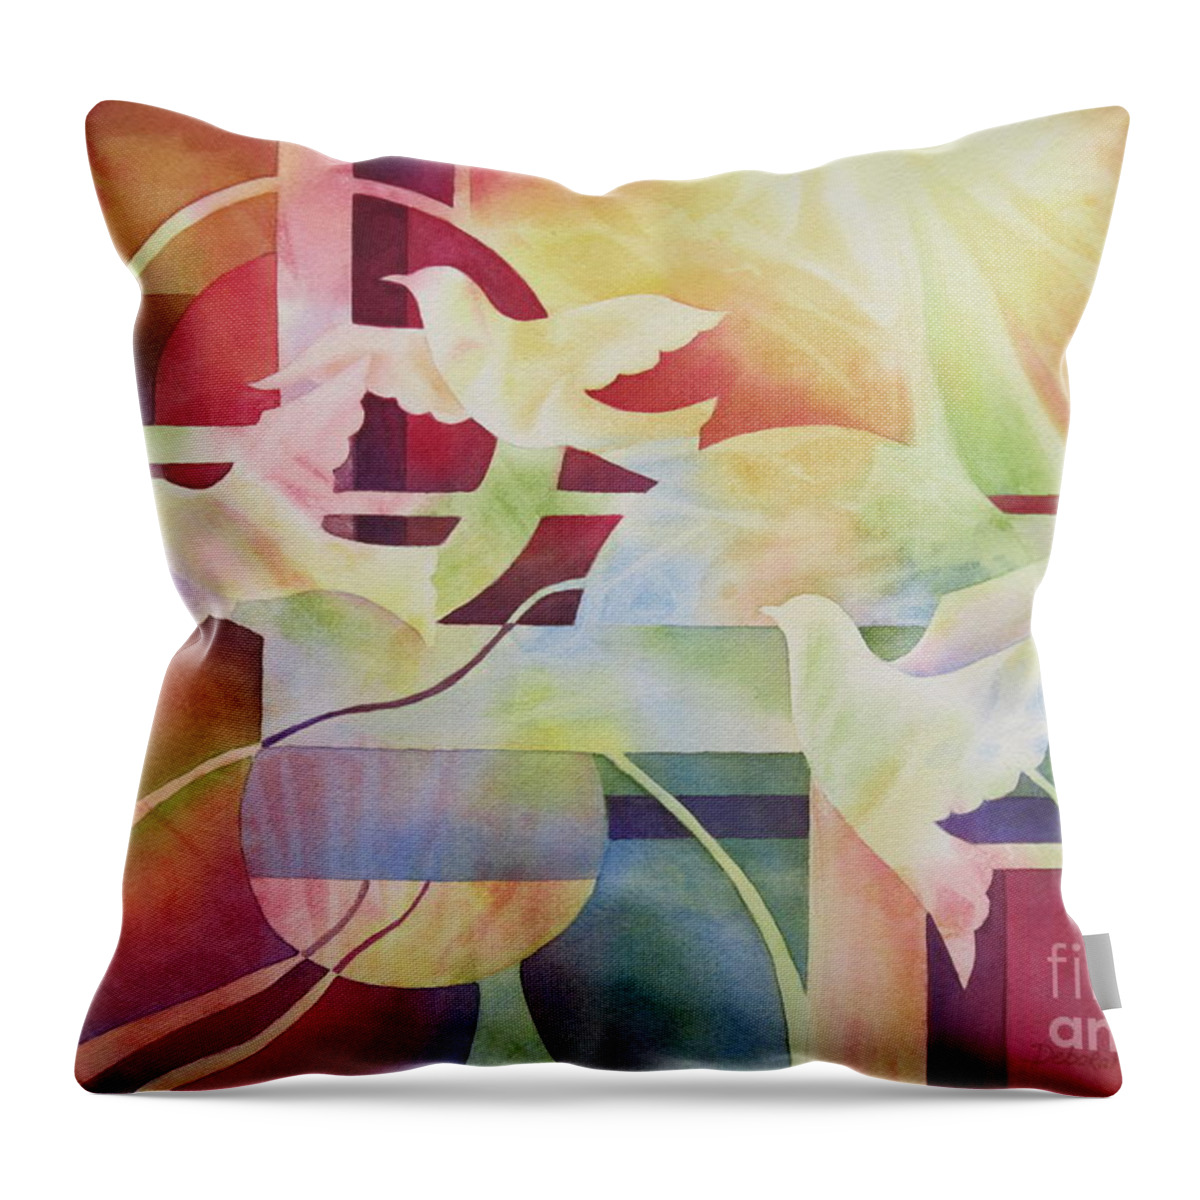 World Peace Throw Pillow featuring the painting World Peace 2 by Deborah Ronglien